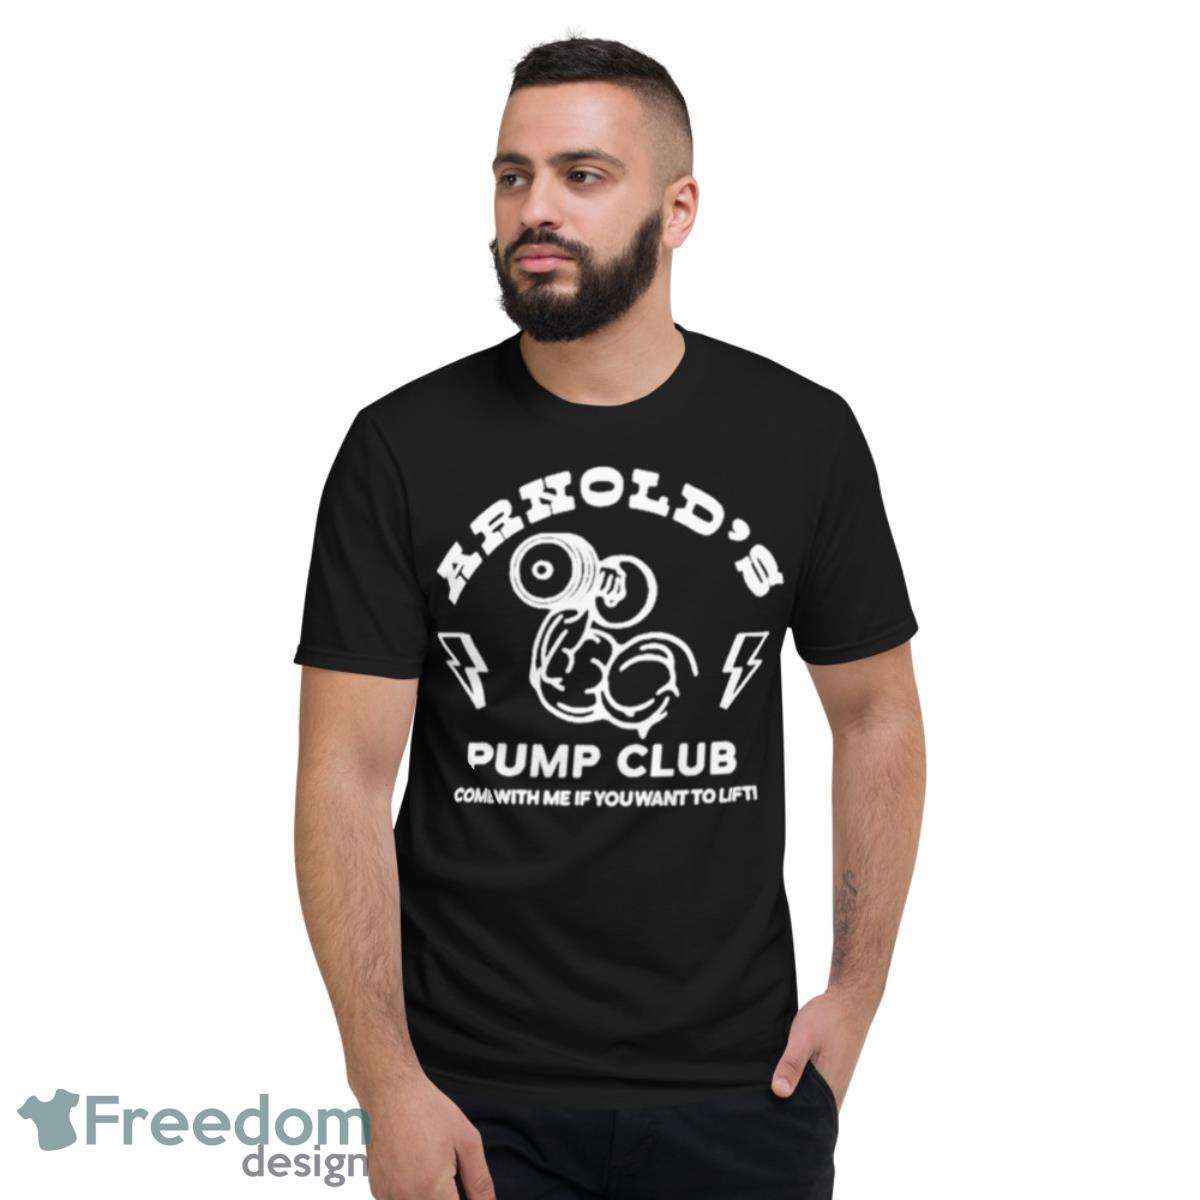 Arnold’s Pump Club Come With Me If You Want To Lift Shirt